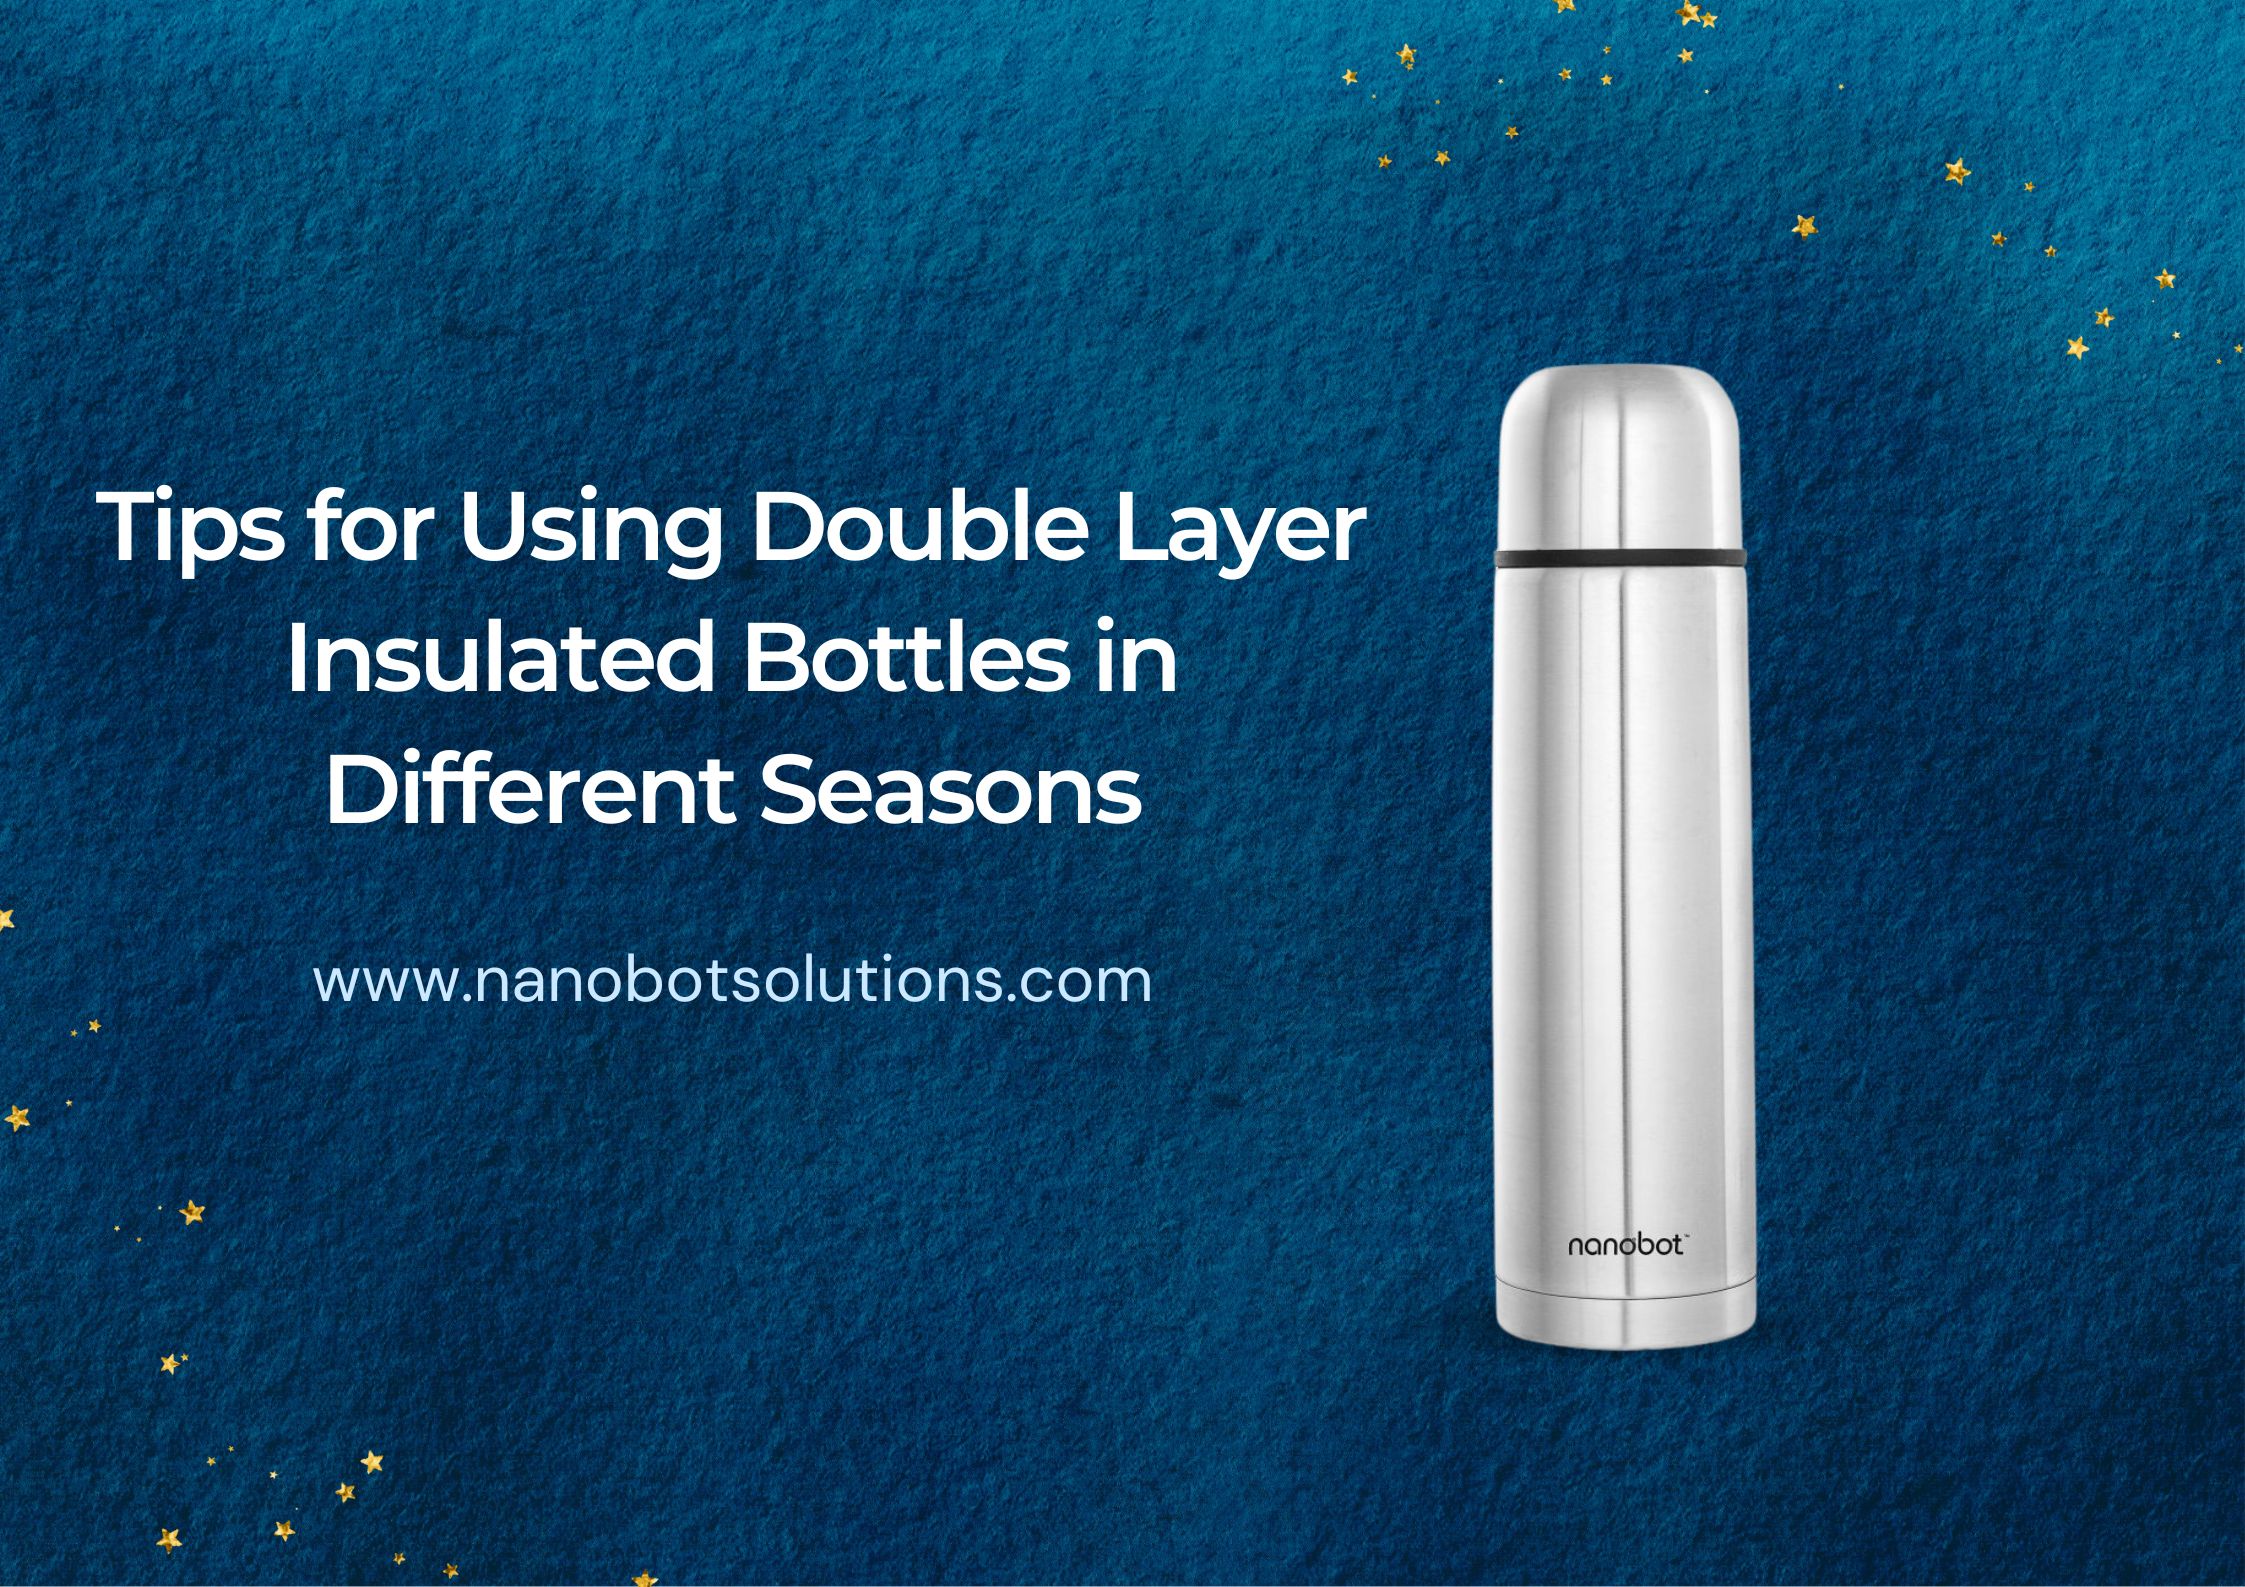 Tips for Using Double Layer Insulated Bottles in Different Seasons | Nanobot